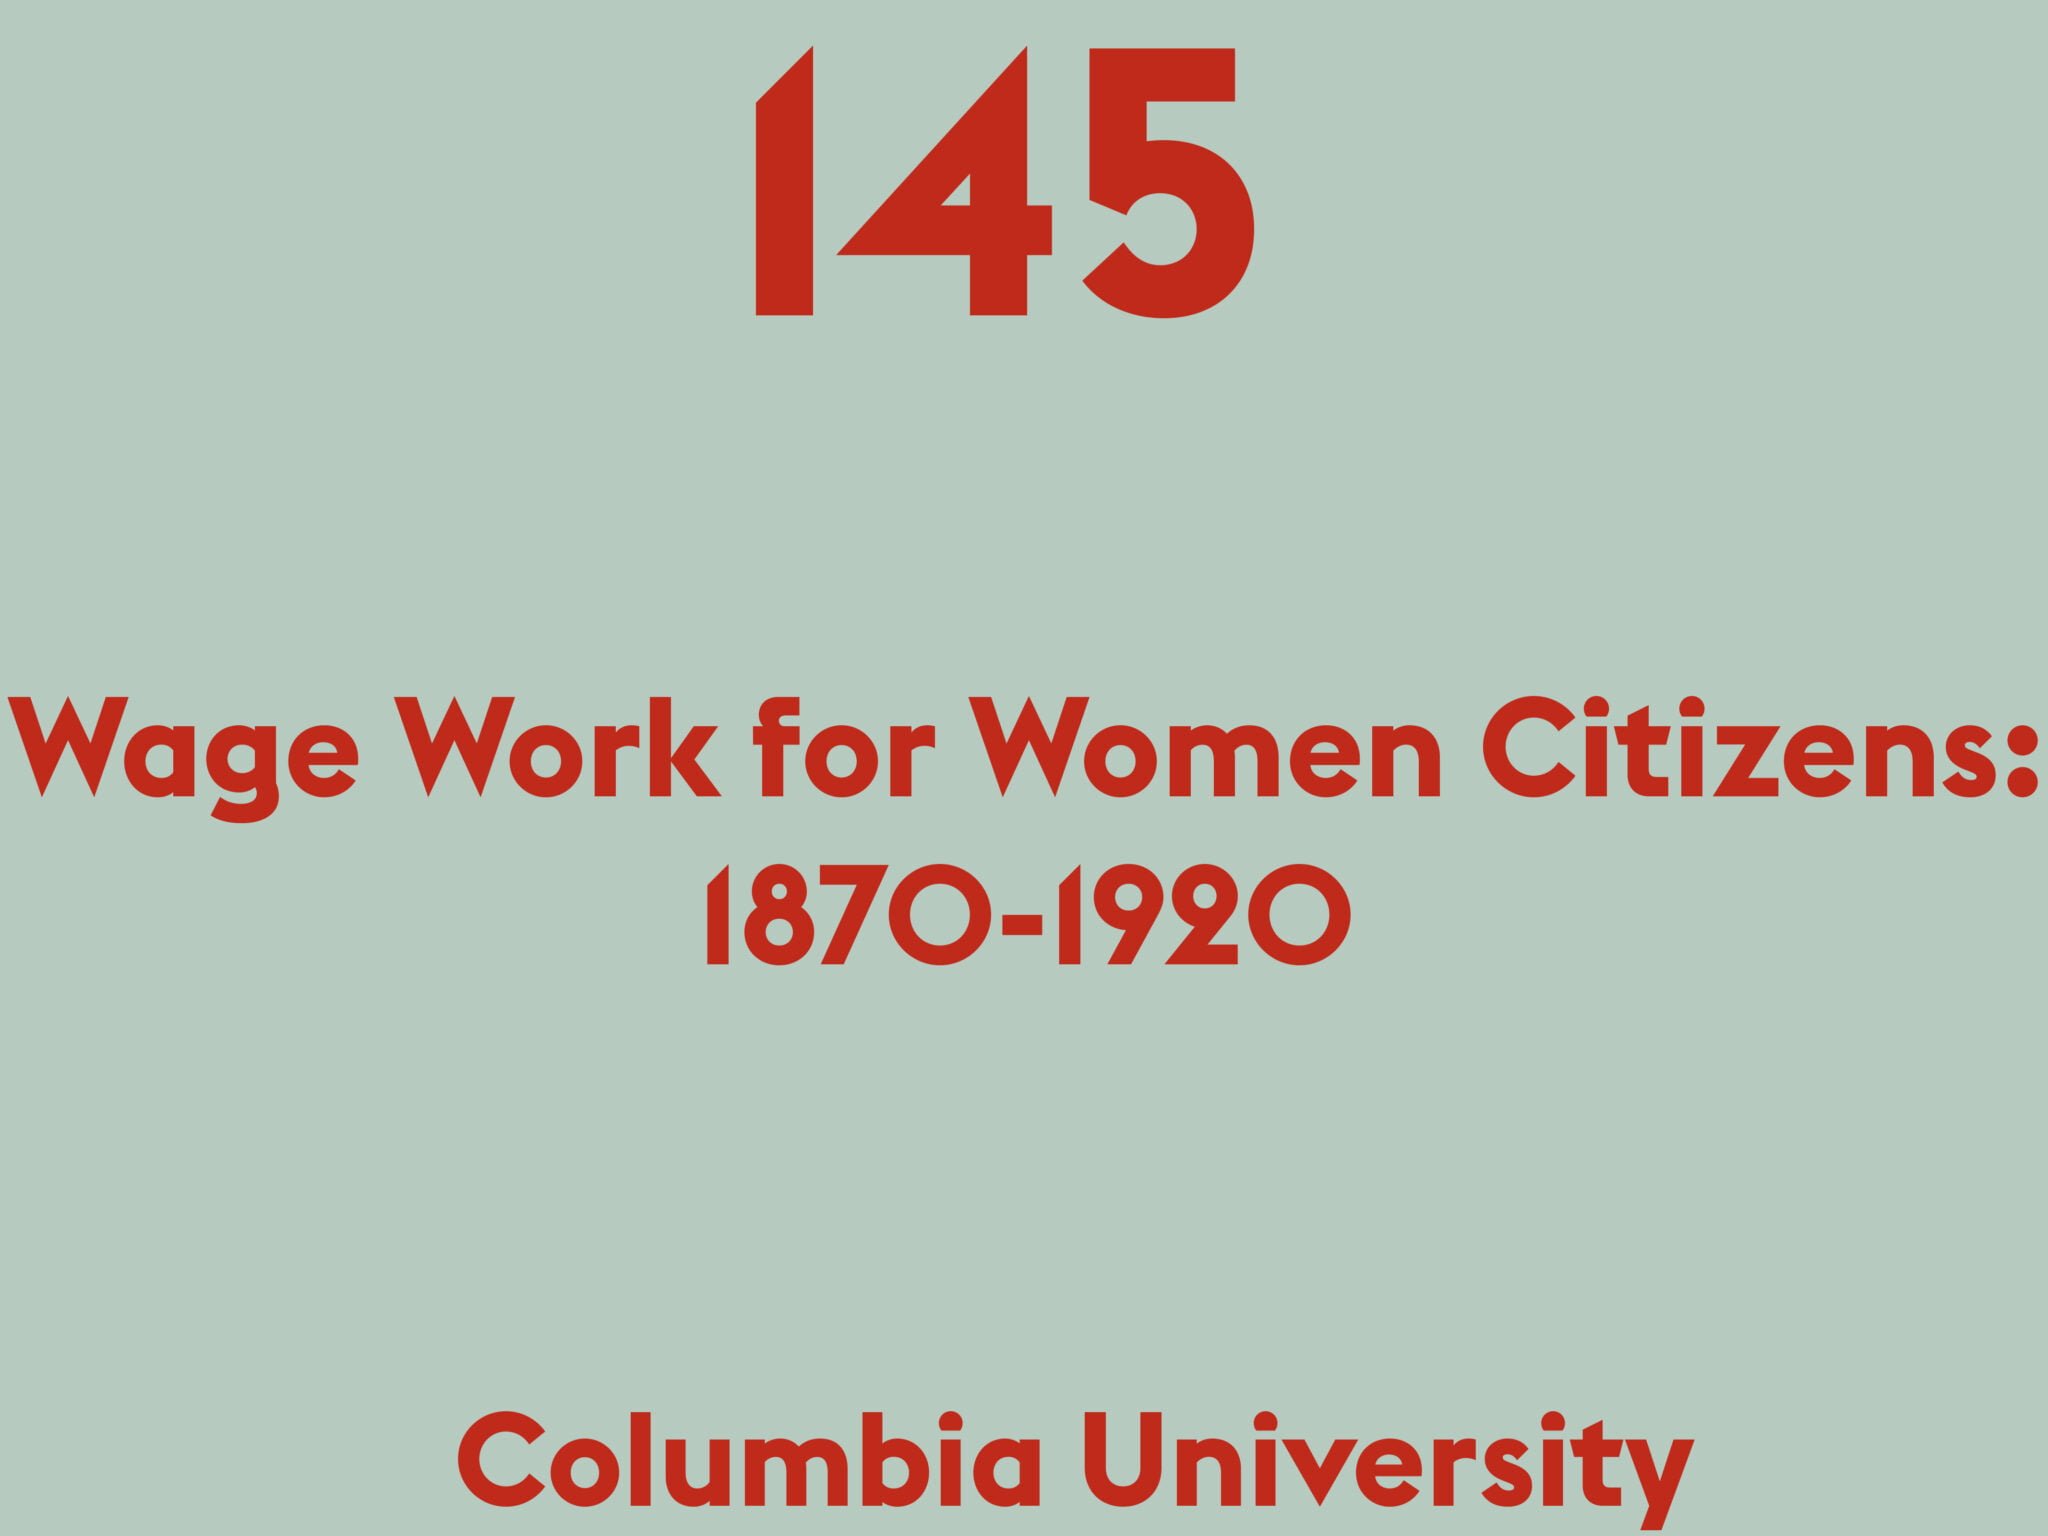 Wage Work for Women Citizens: 1870-1920